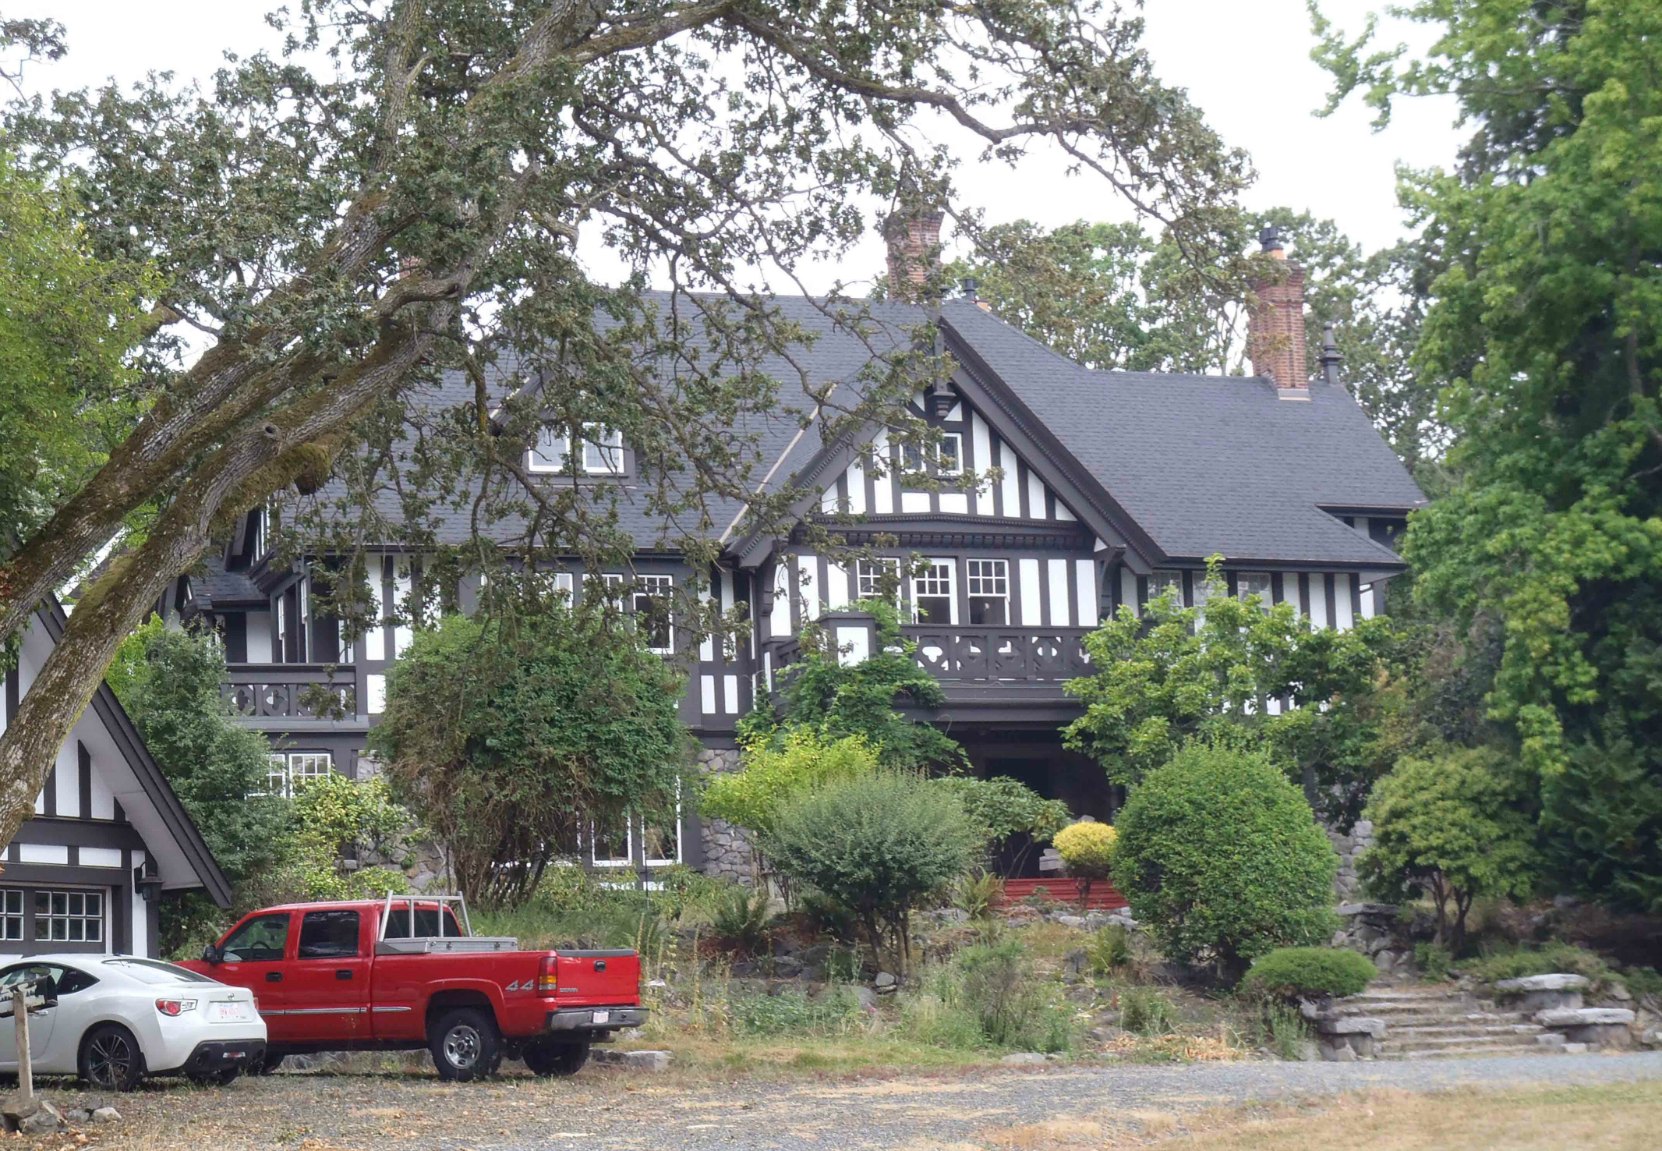 1770 Rockland Avenue, built in 1905 by architect Samuel Maclure for Richard Biggerstaff Wilson